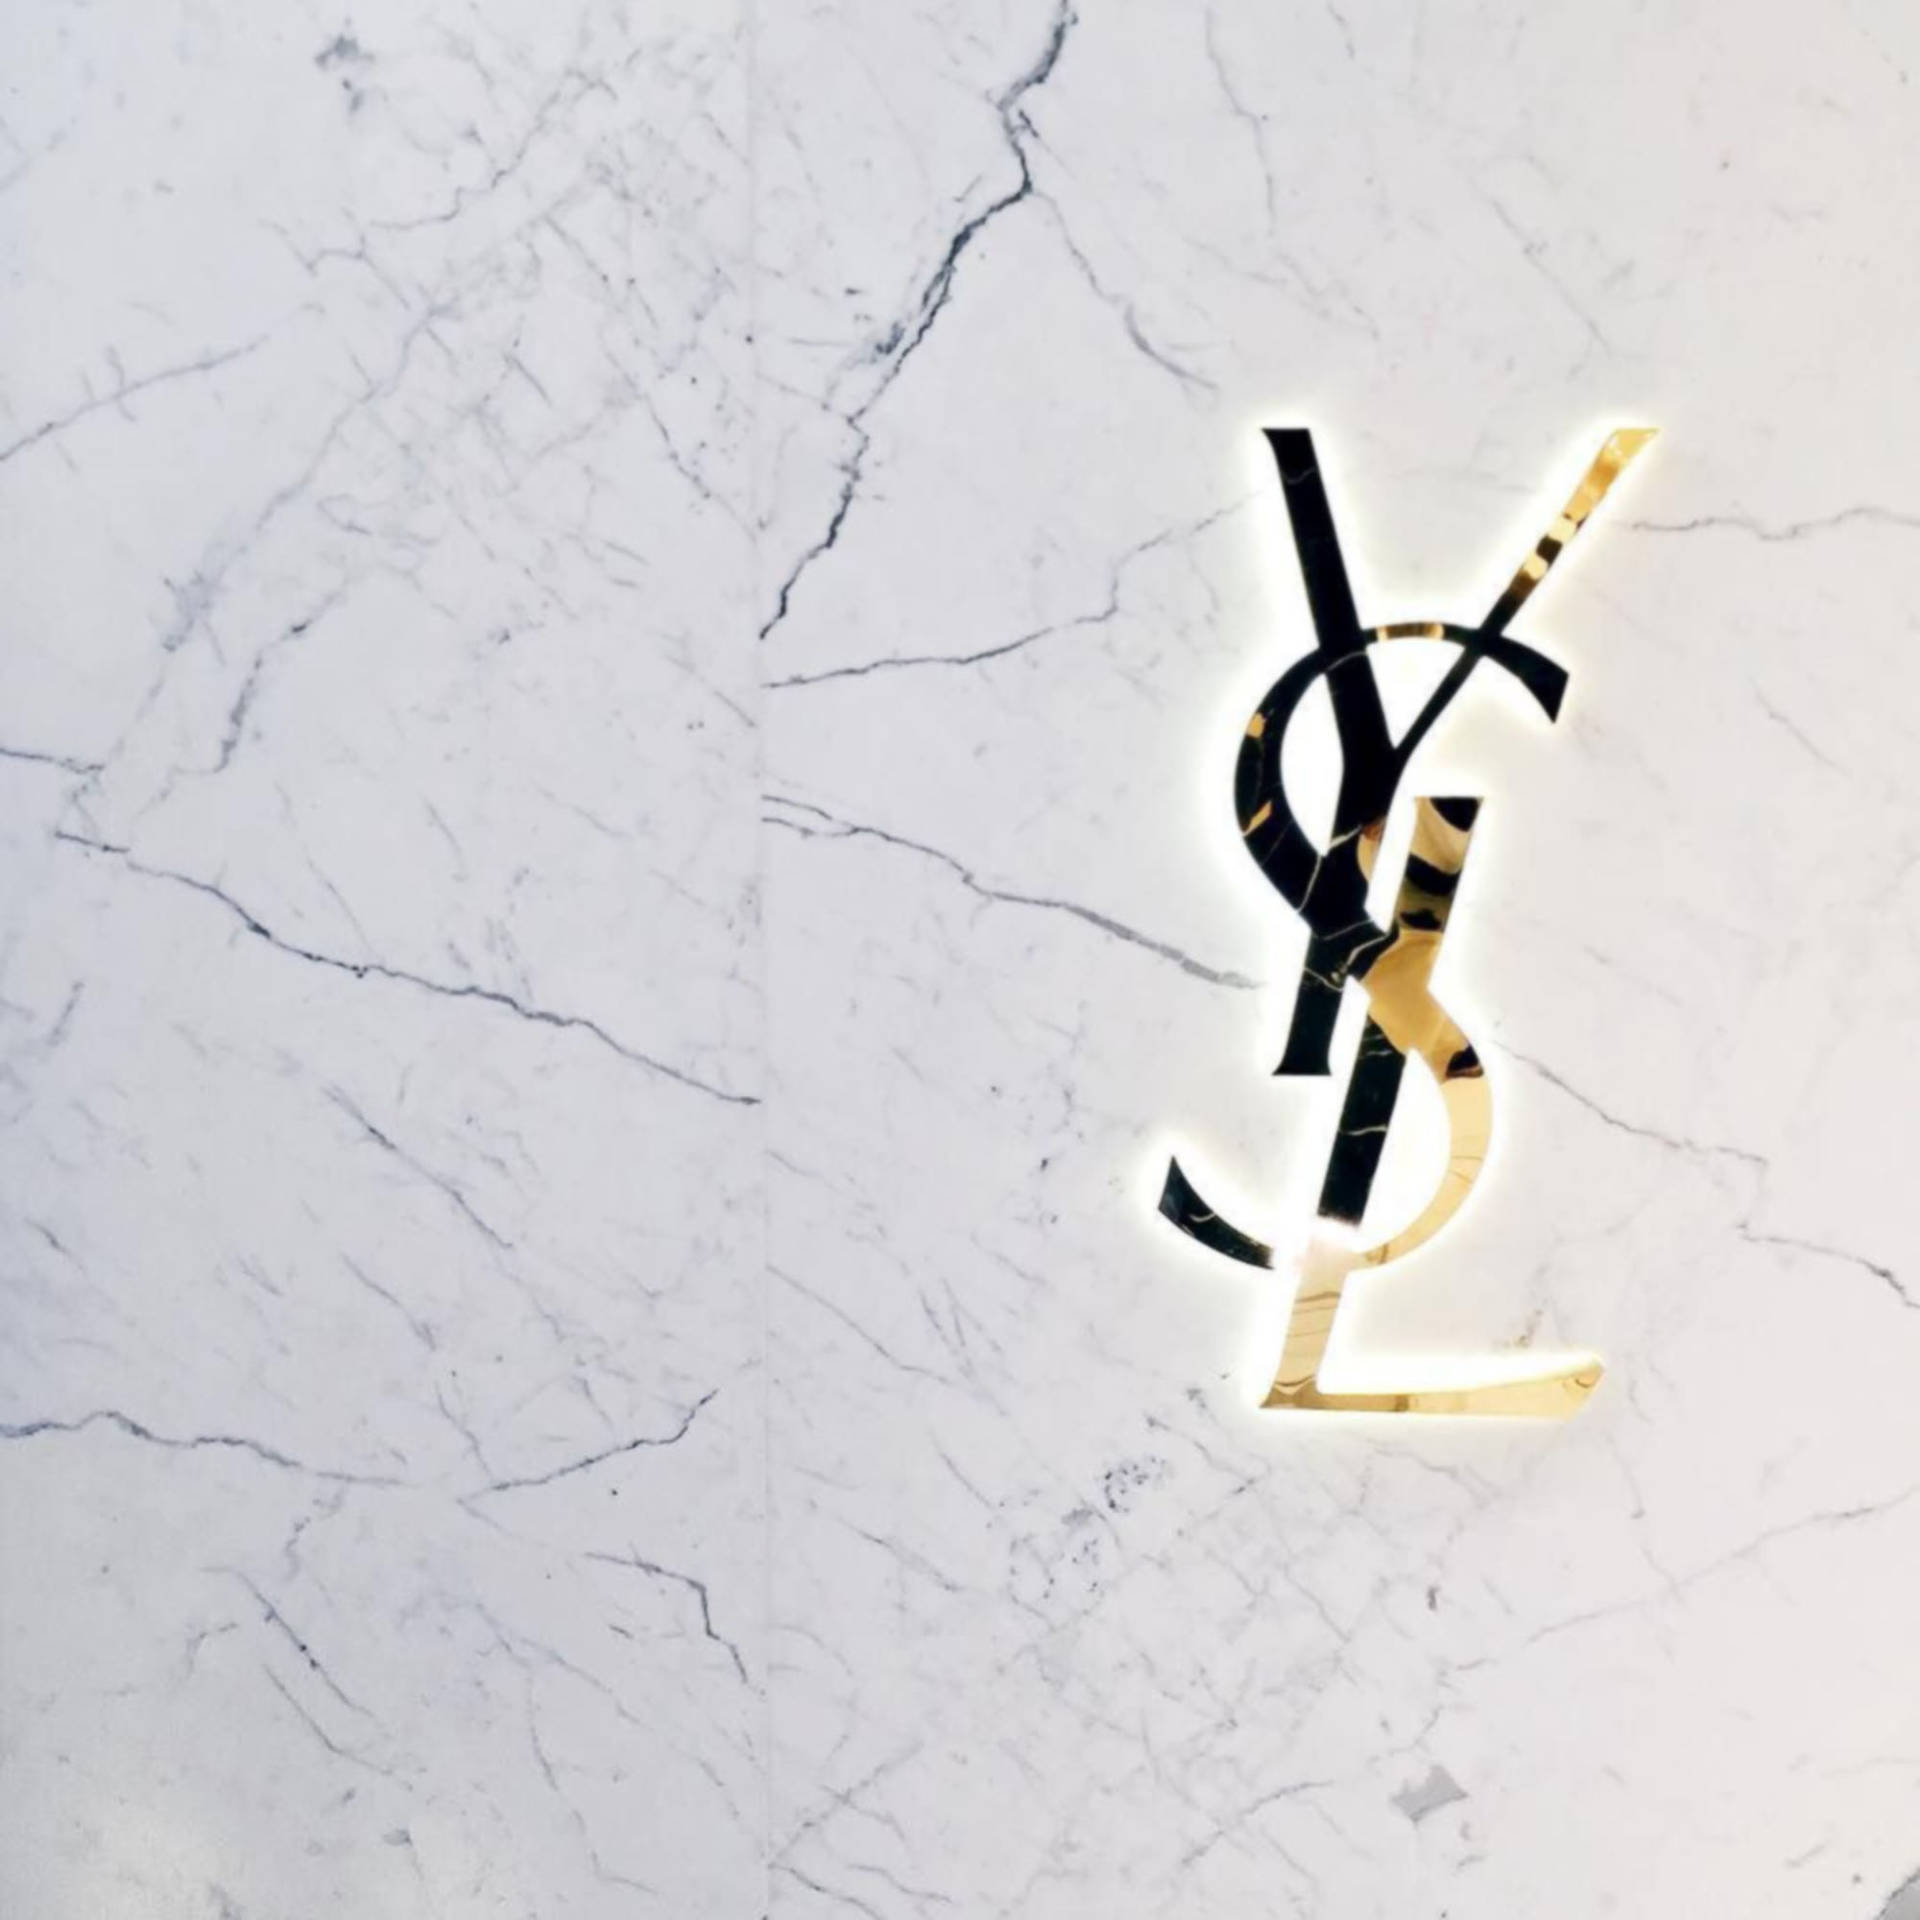 Download Gold YSL At Marble Wallpaper | Wallpapers.com